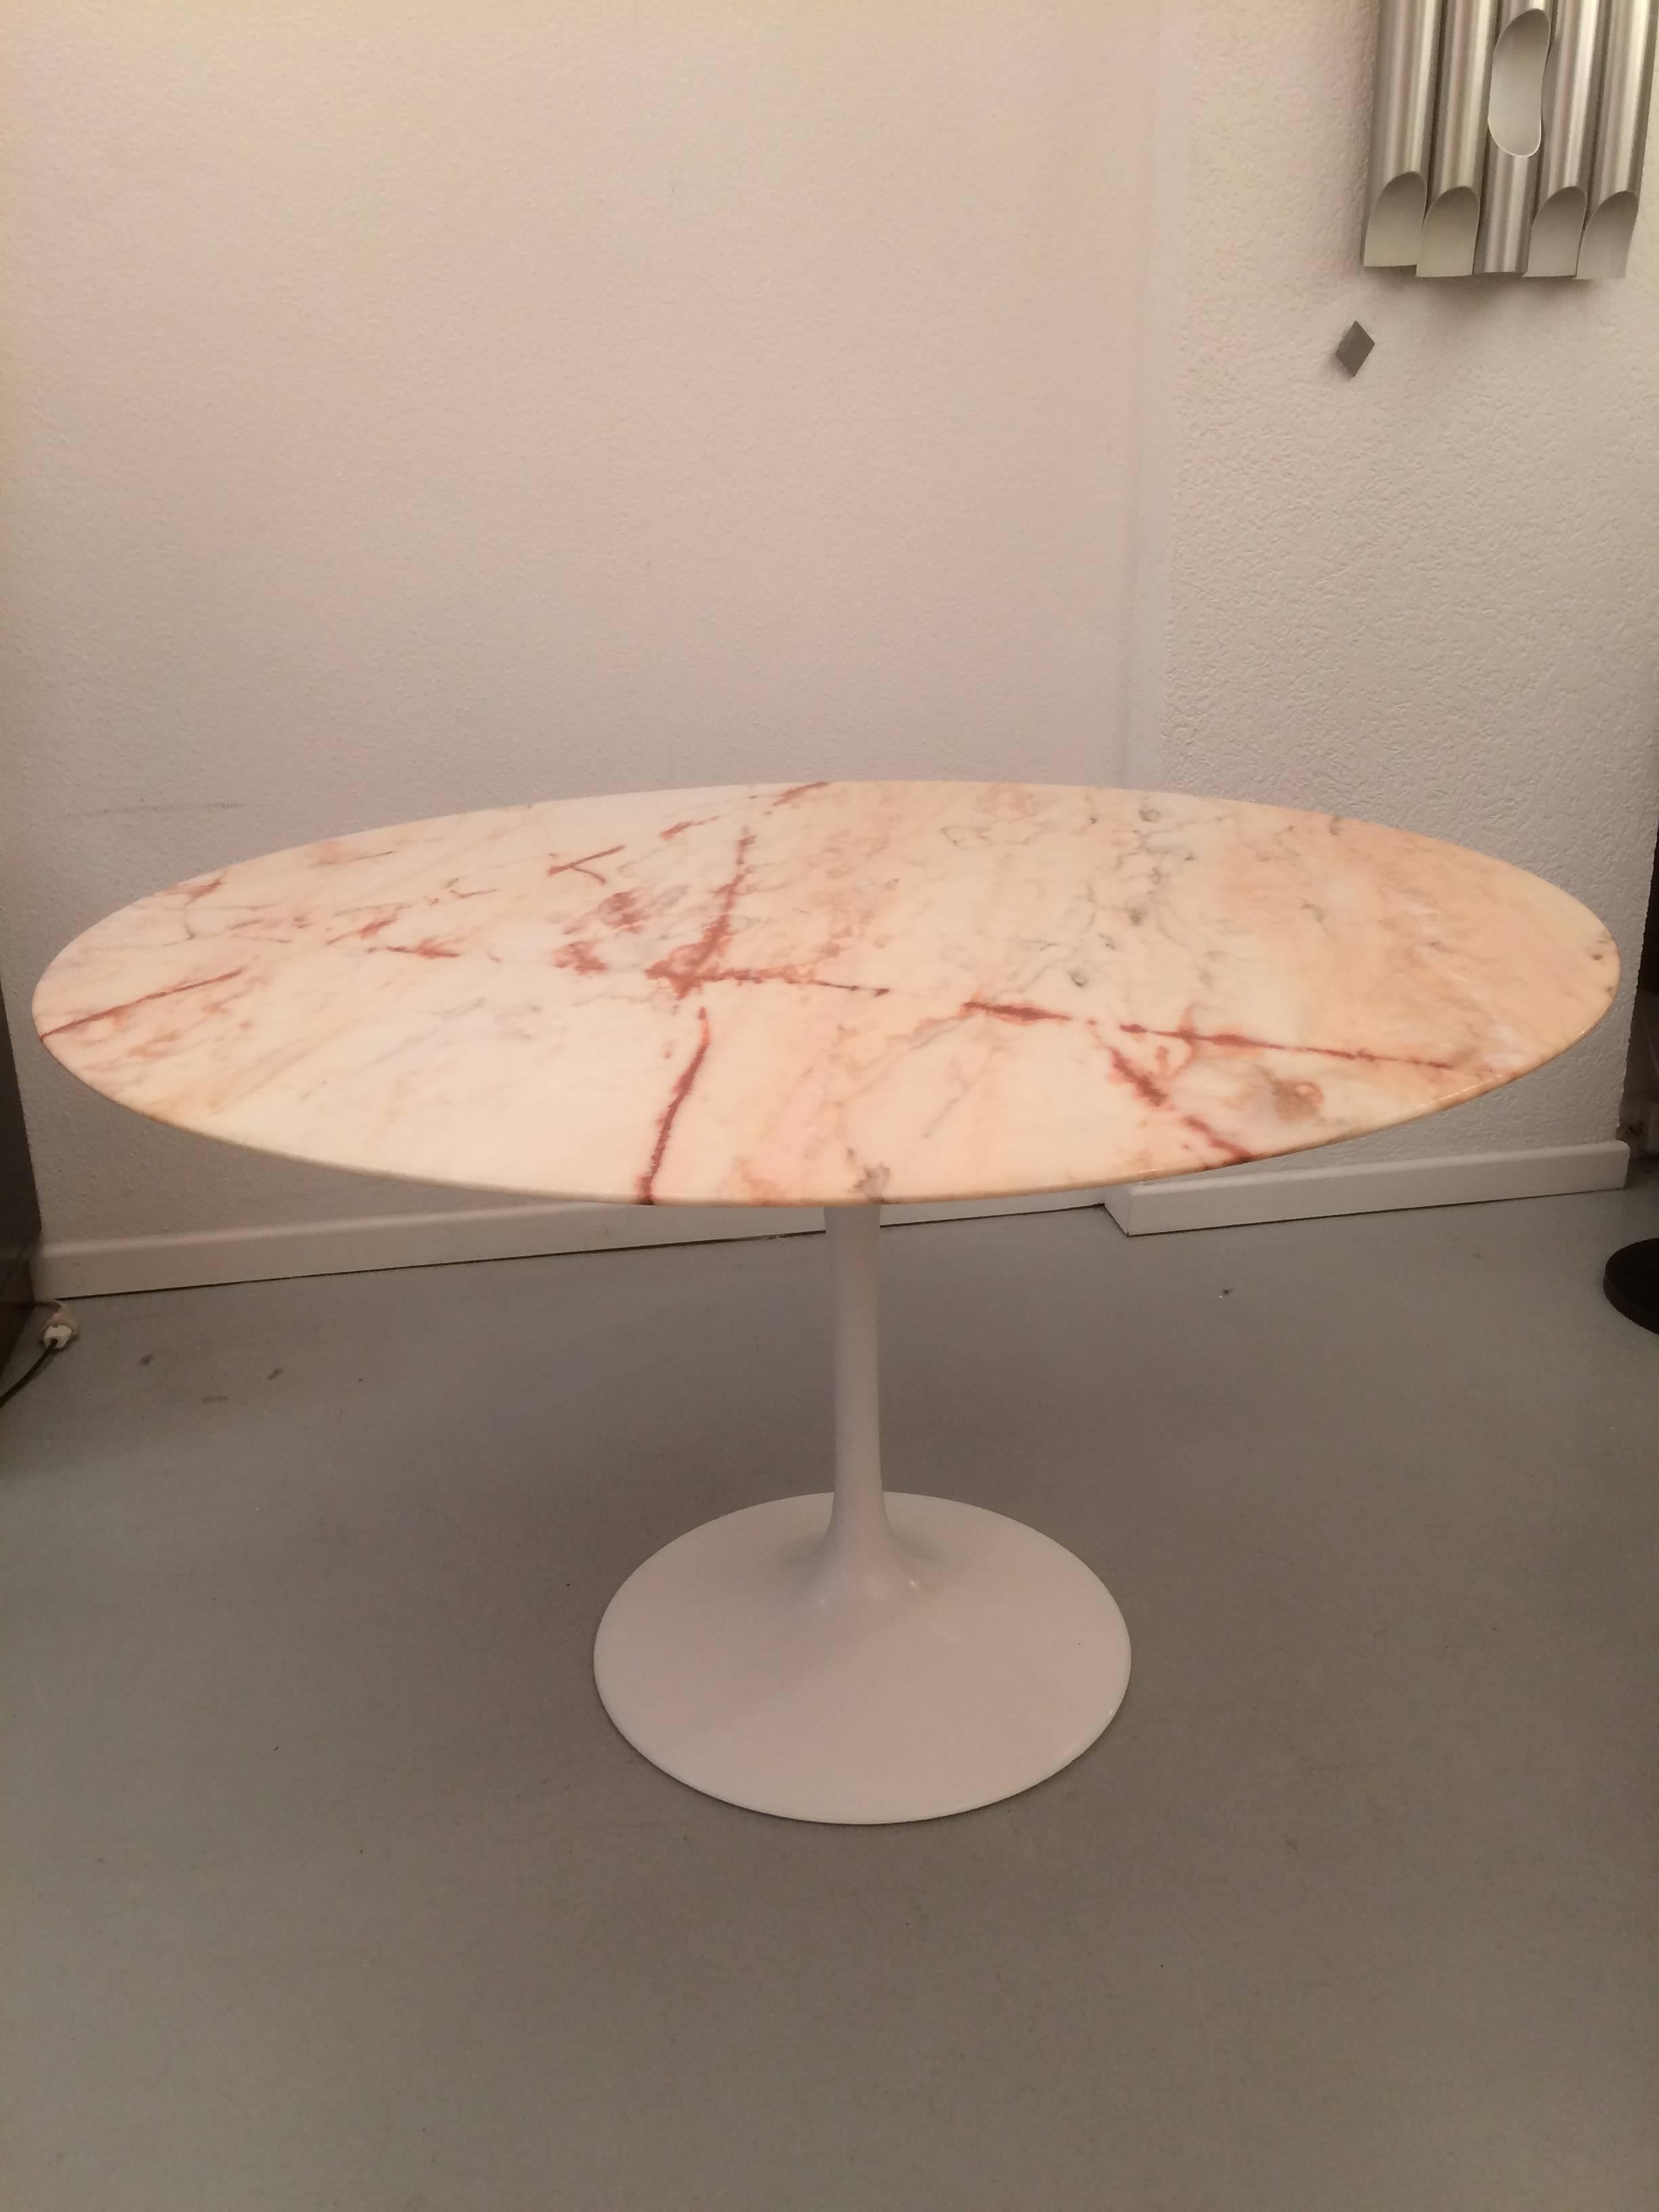 Pink marble tulip dining table by Eero Saarinen produced by Knoll International, circa 1970
Very good condition. Signed under the base.
Measures: 120 x 71 cm.